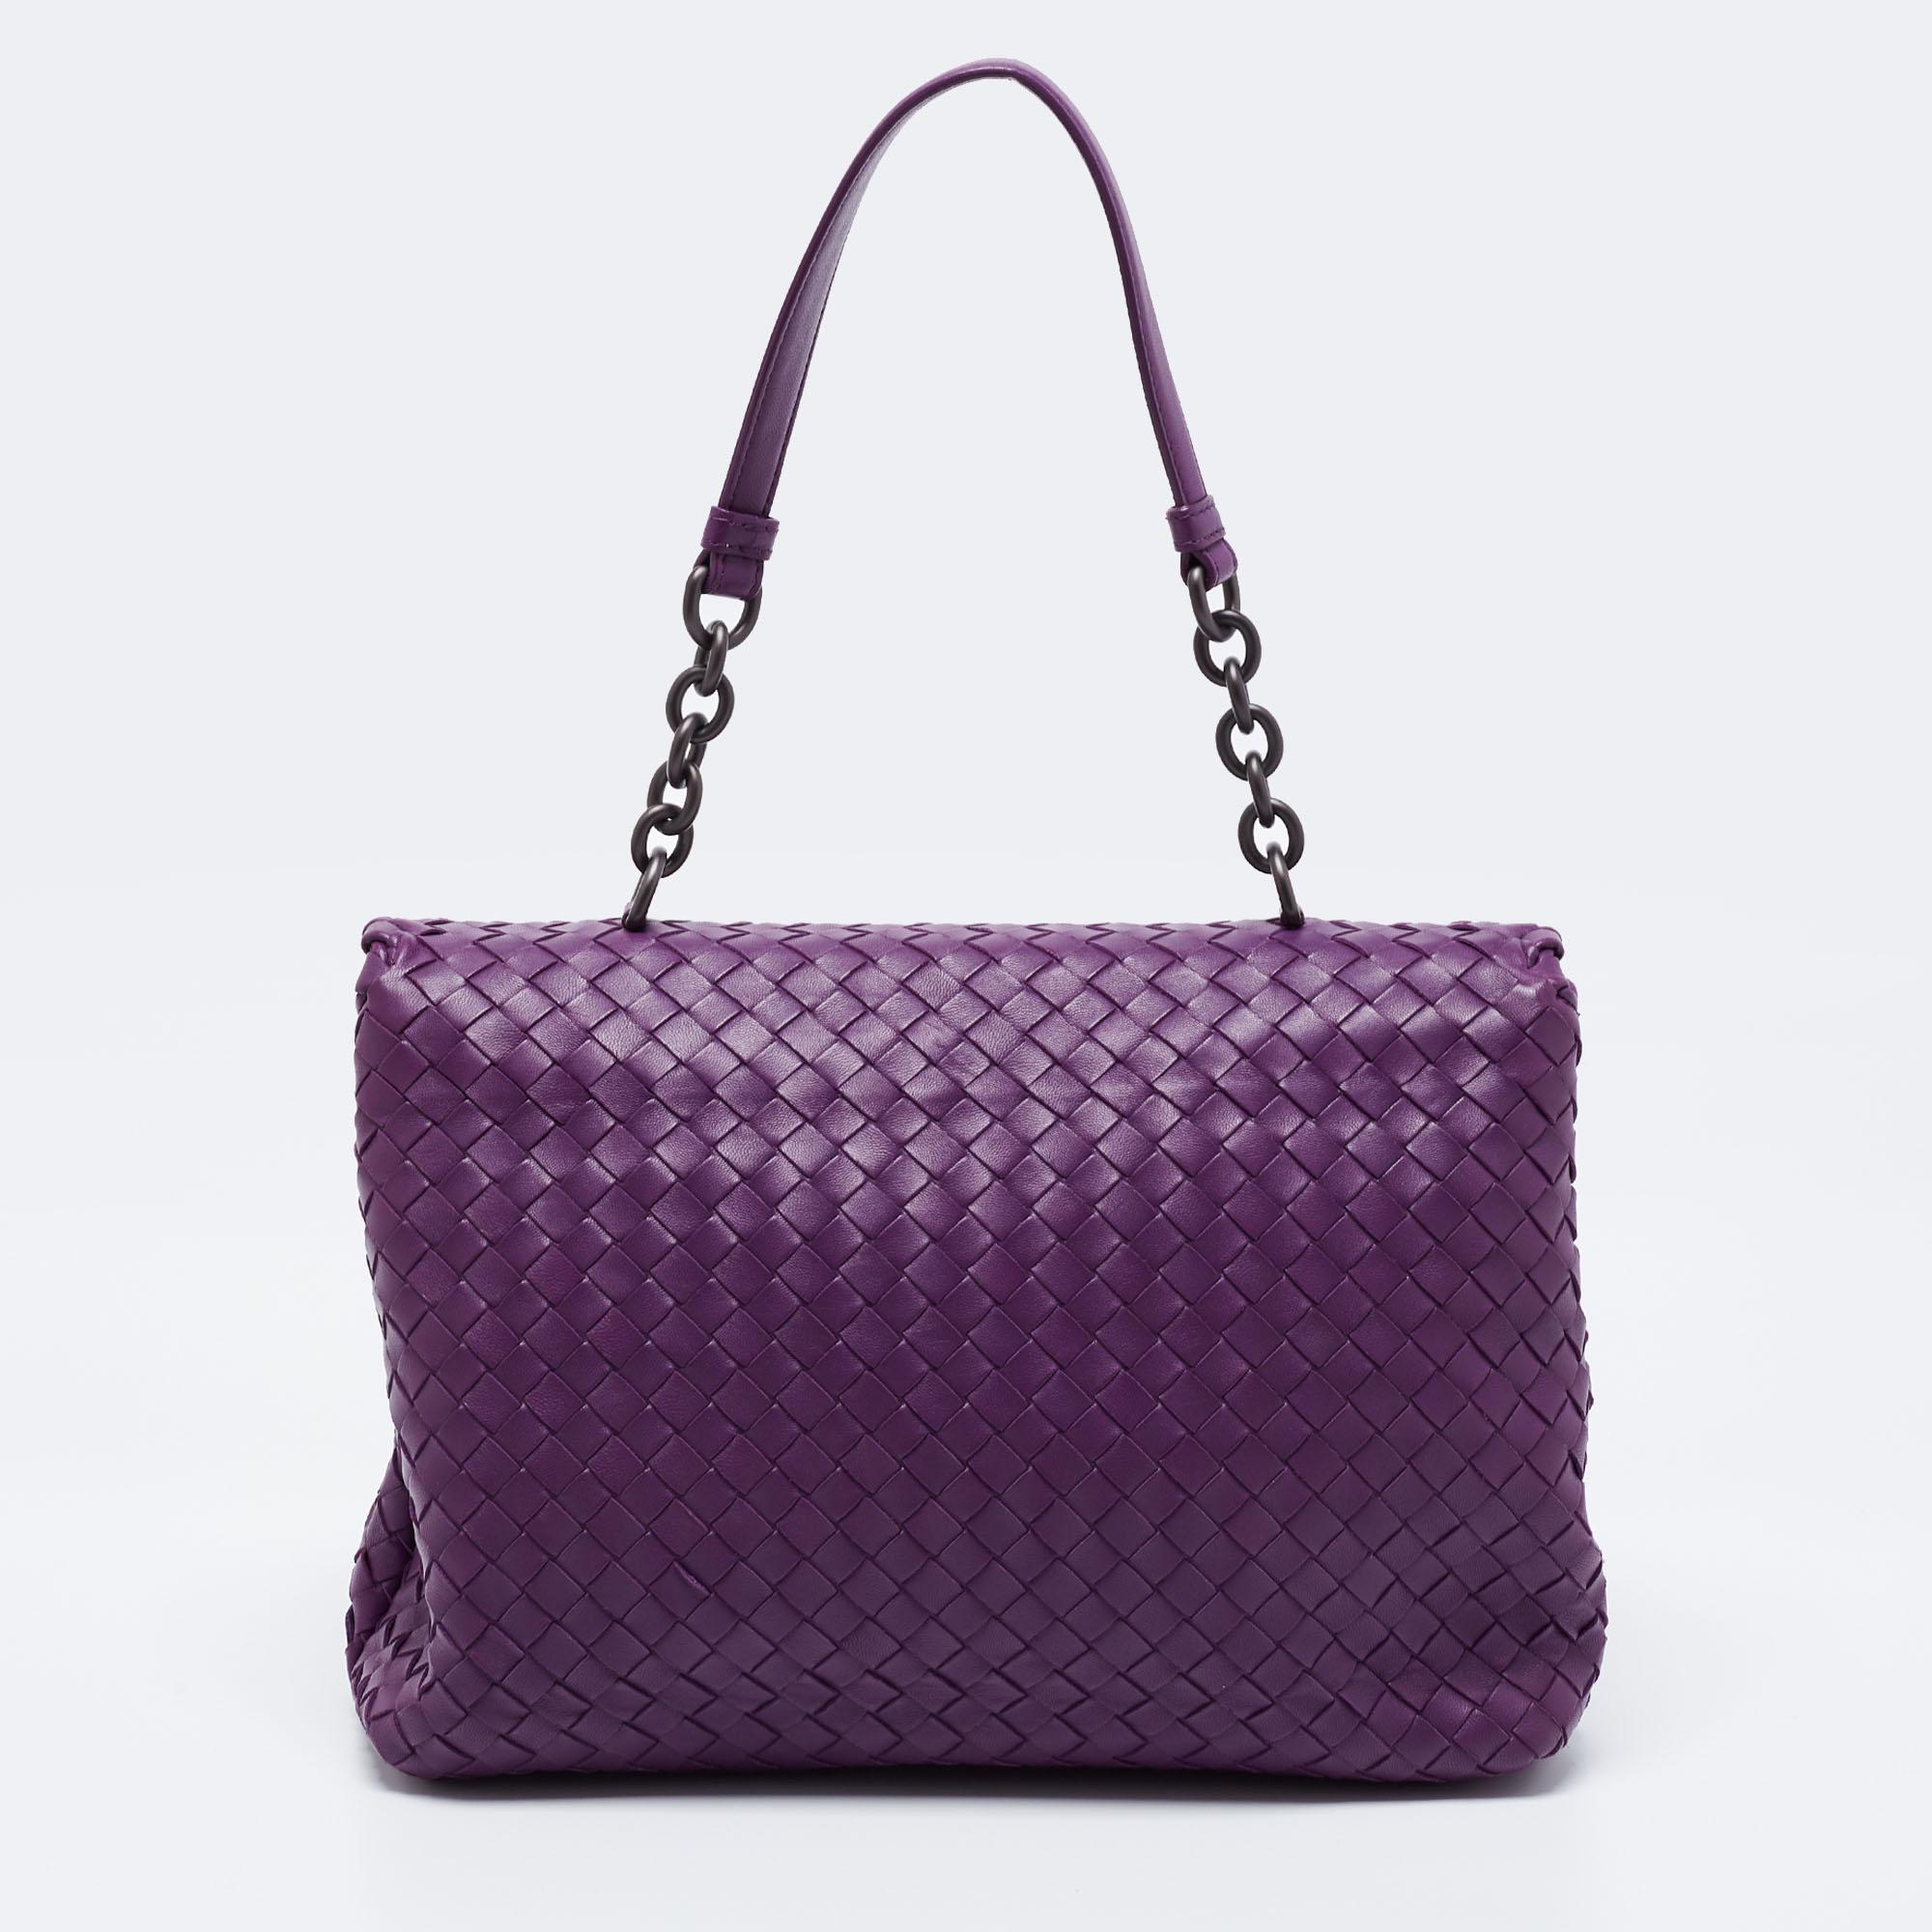 Named after the renaissance building 'Teatro Olimpico,' the Bottega Veneta Olimpia bag reflects the brand's faultless weaving technique. This purple creation comes made from Intrecciato leather and is held by a chain-leather handle at the top. Lined